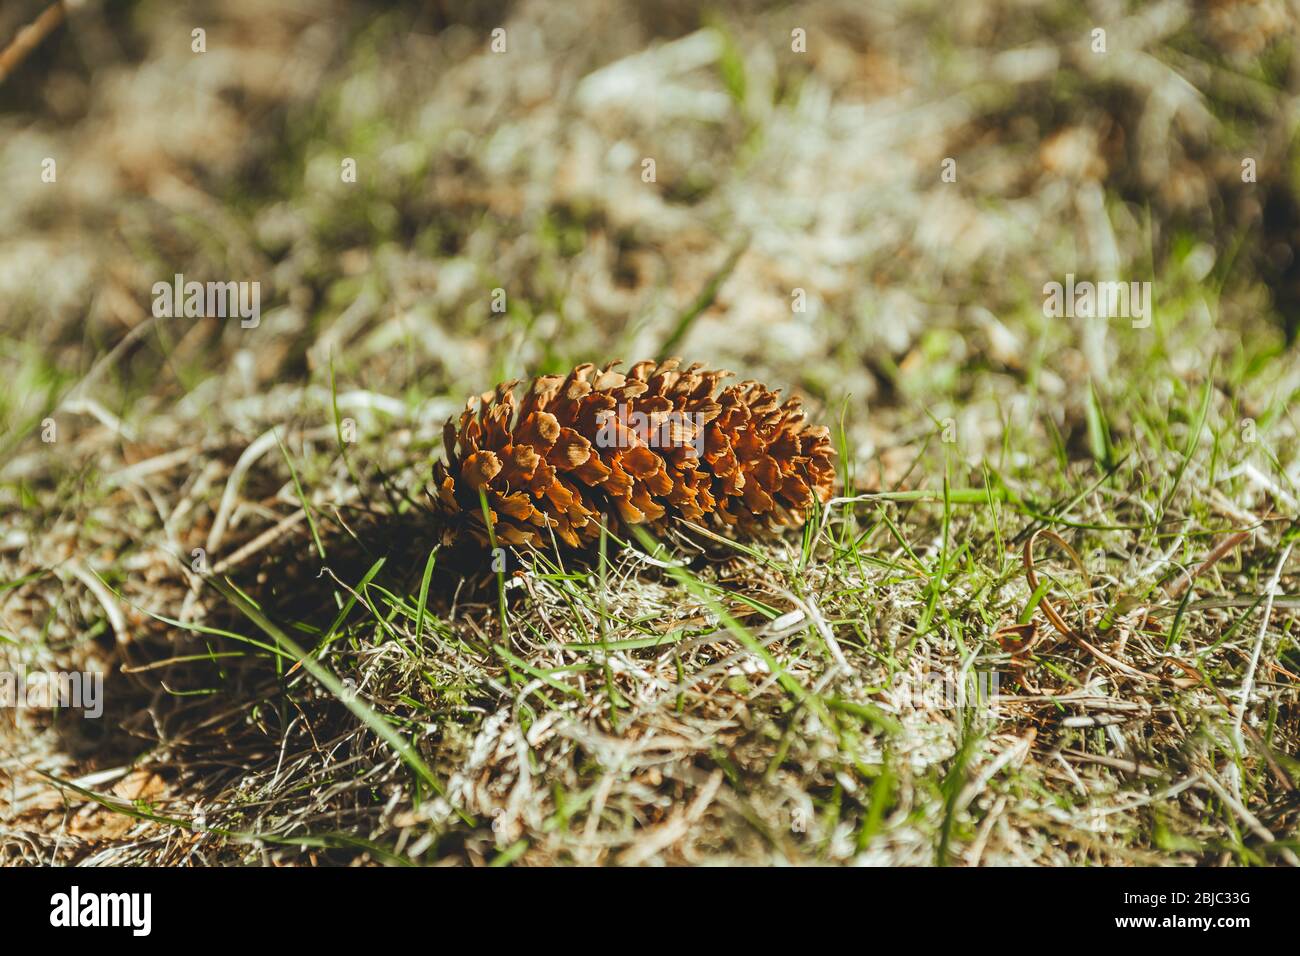 Conifer cone laying on the grass in the forest. A cone is an organ on plants in the division Pinophyta (conifers) that contains the reproductive struc Stock Photo